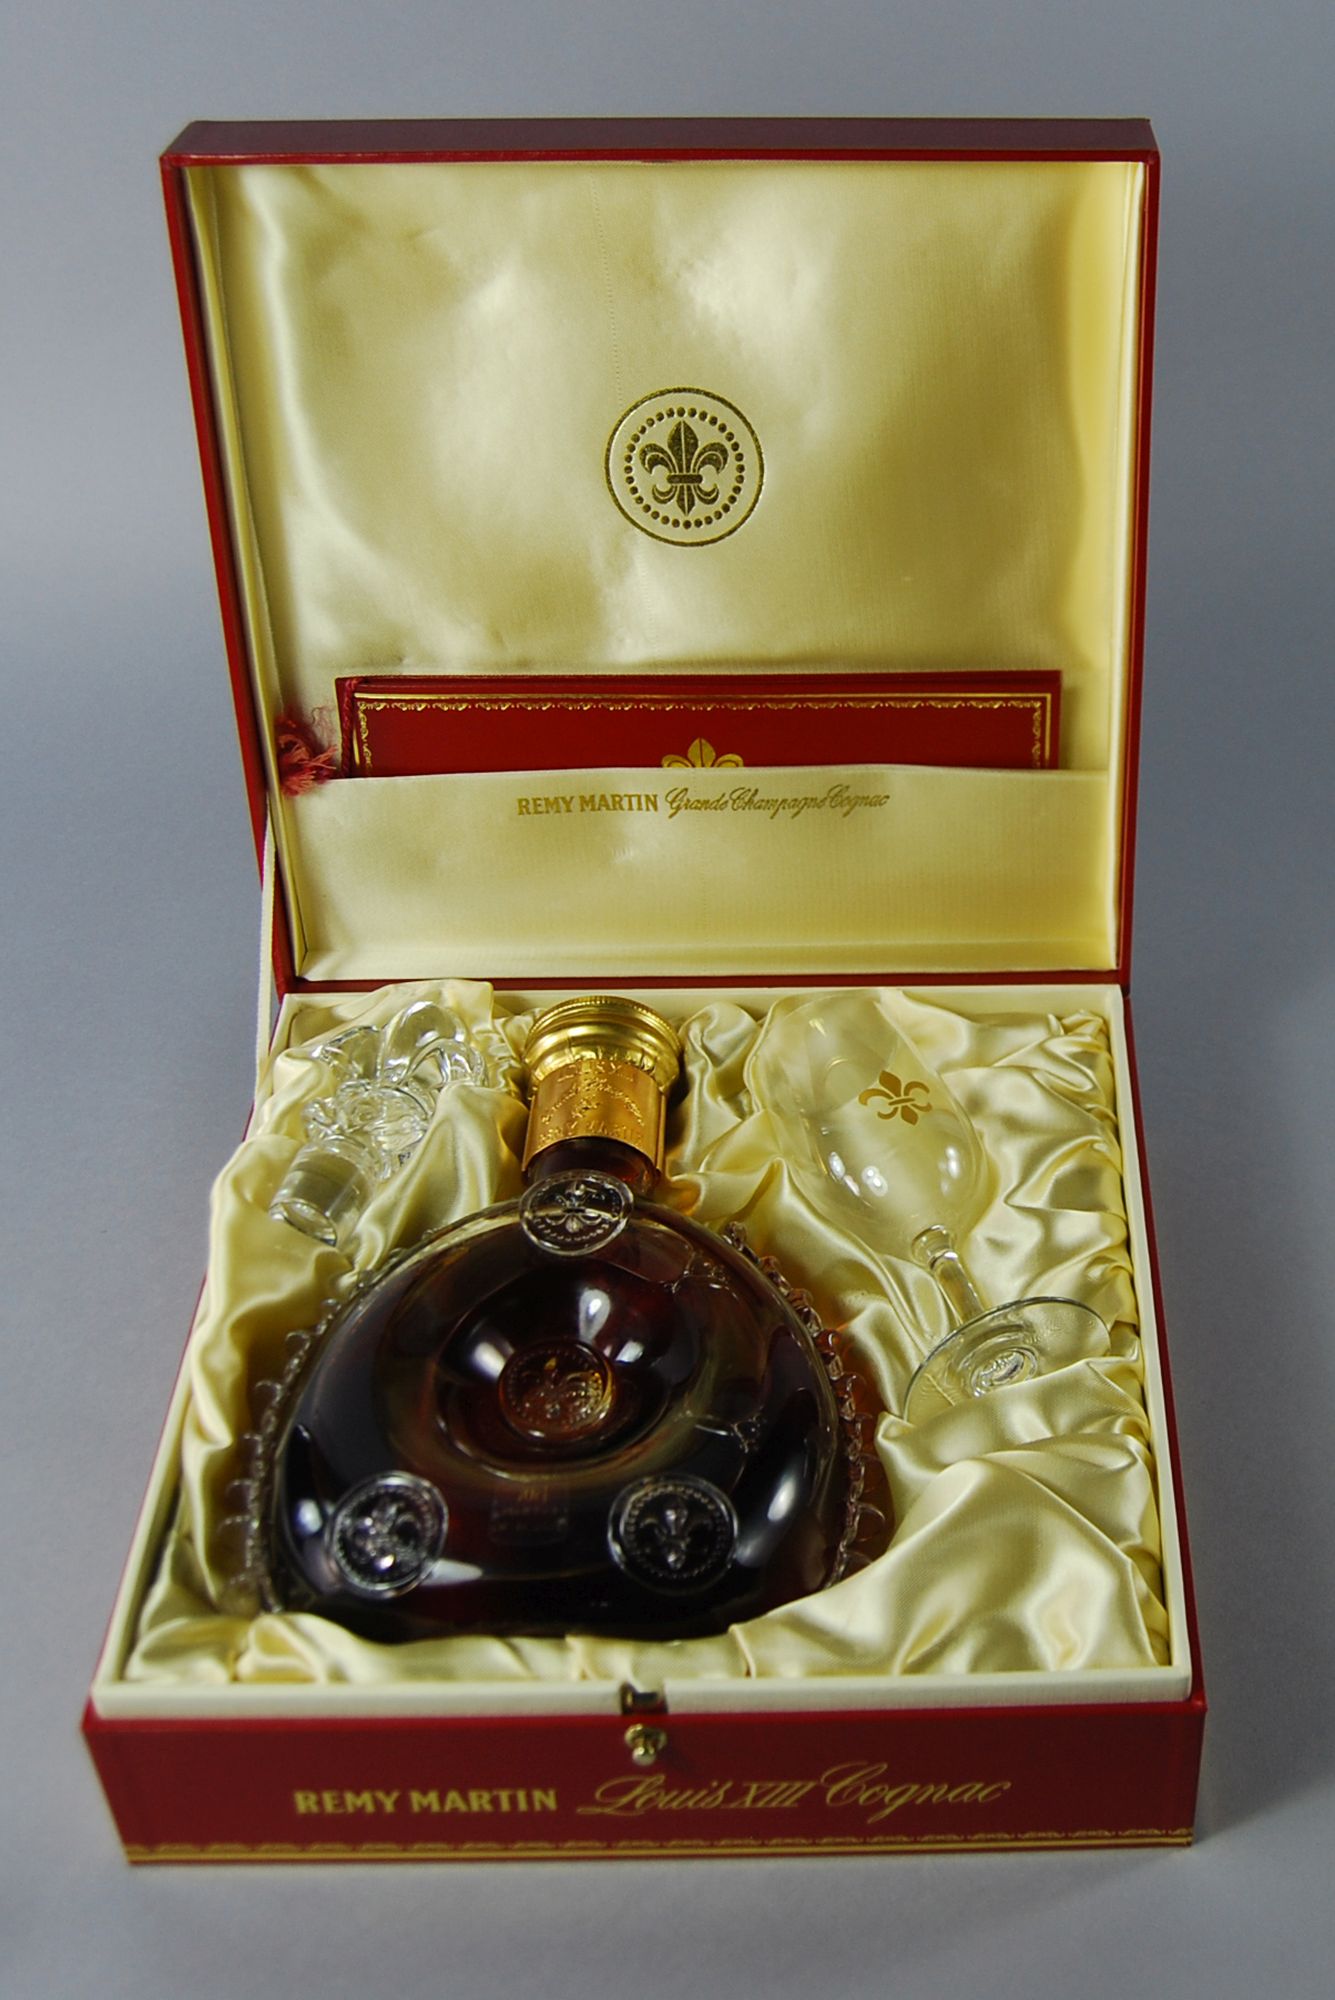 Remy Martin Louis XIII Grande Champagne Cognac, limited edition in Baccarat decanter, carafe no. - Image 2 of 2